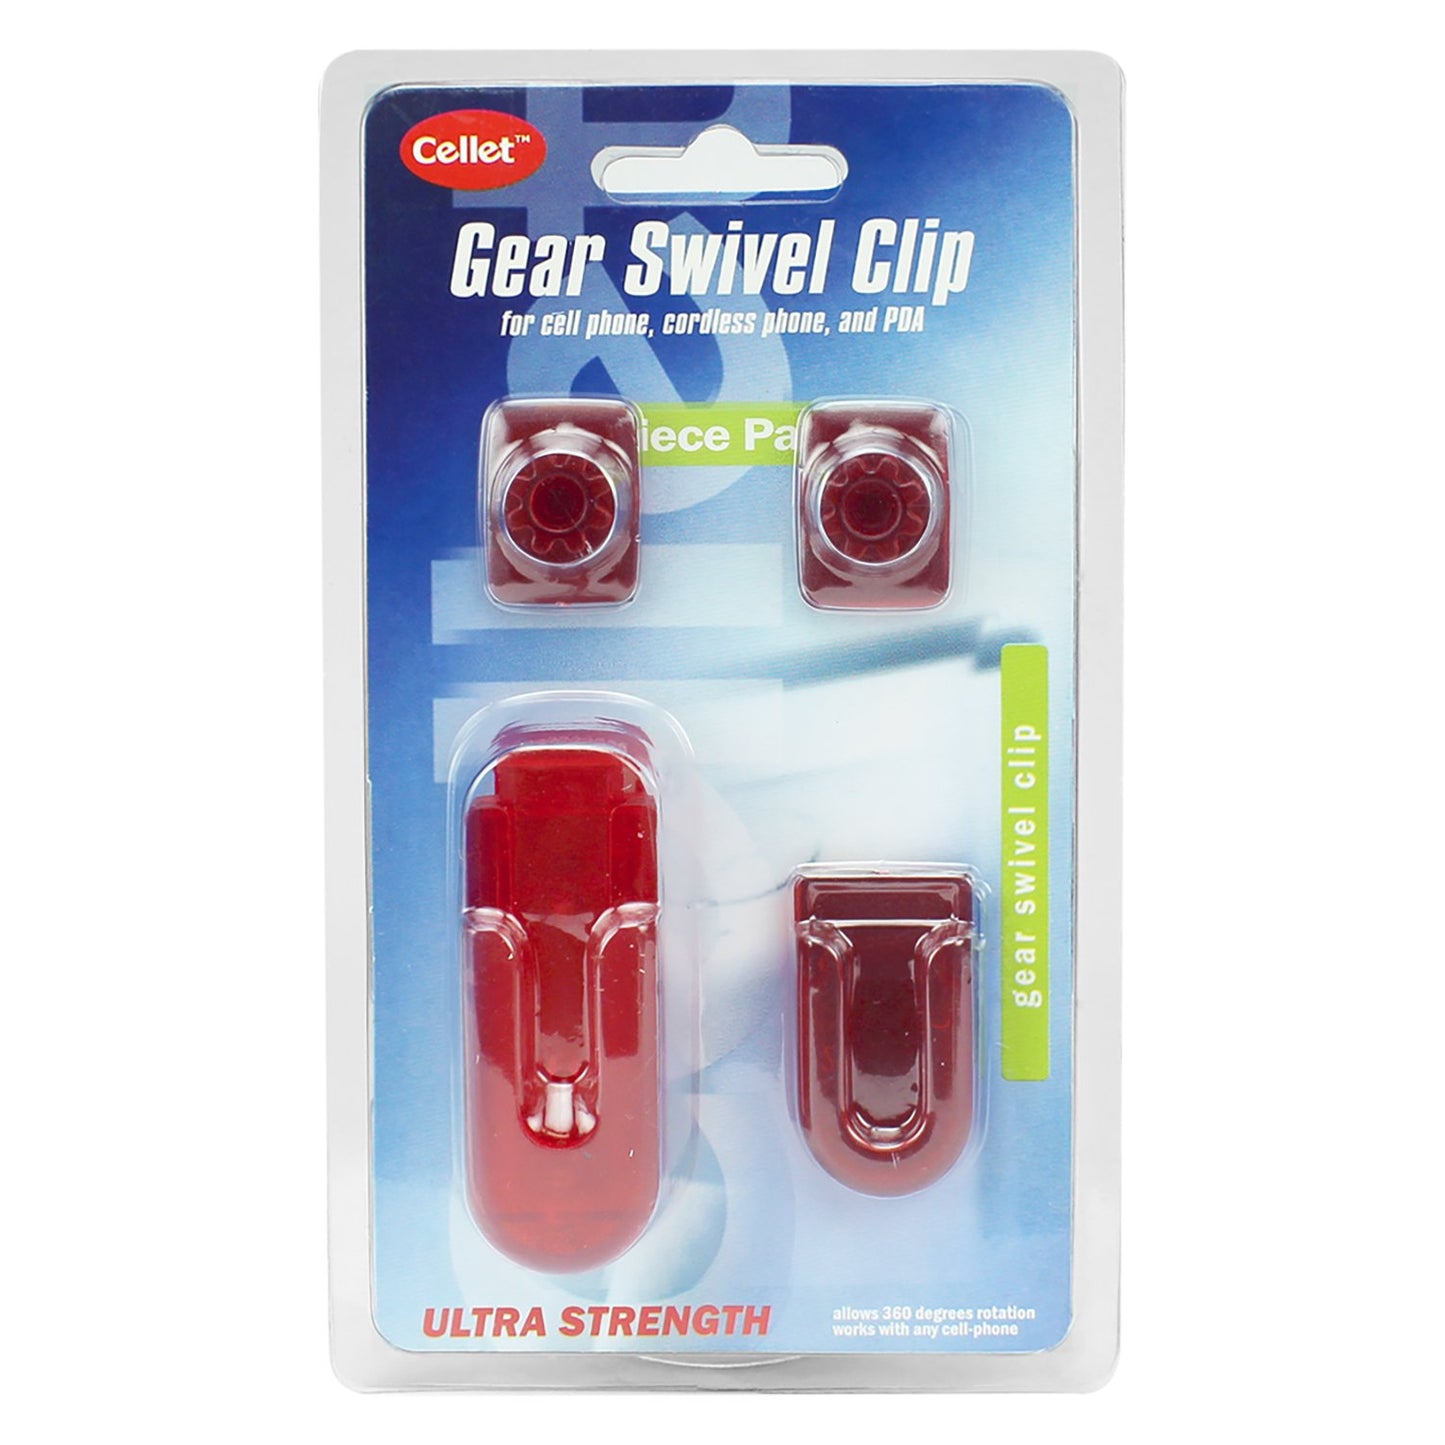 GEAR4RED - Cellet Red Universal Swivel 4PC Gear Clip (4 in 1) - Sealed Clamshell Package